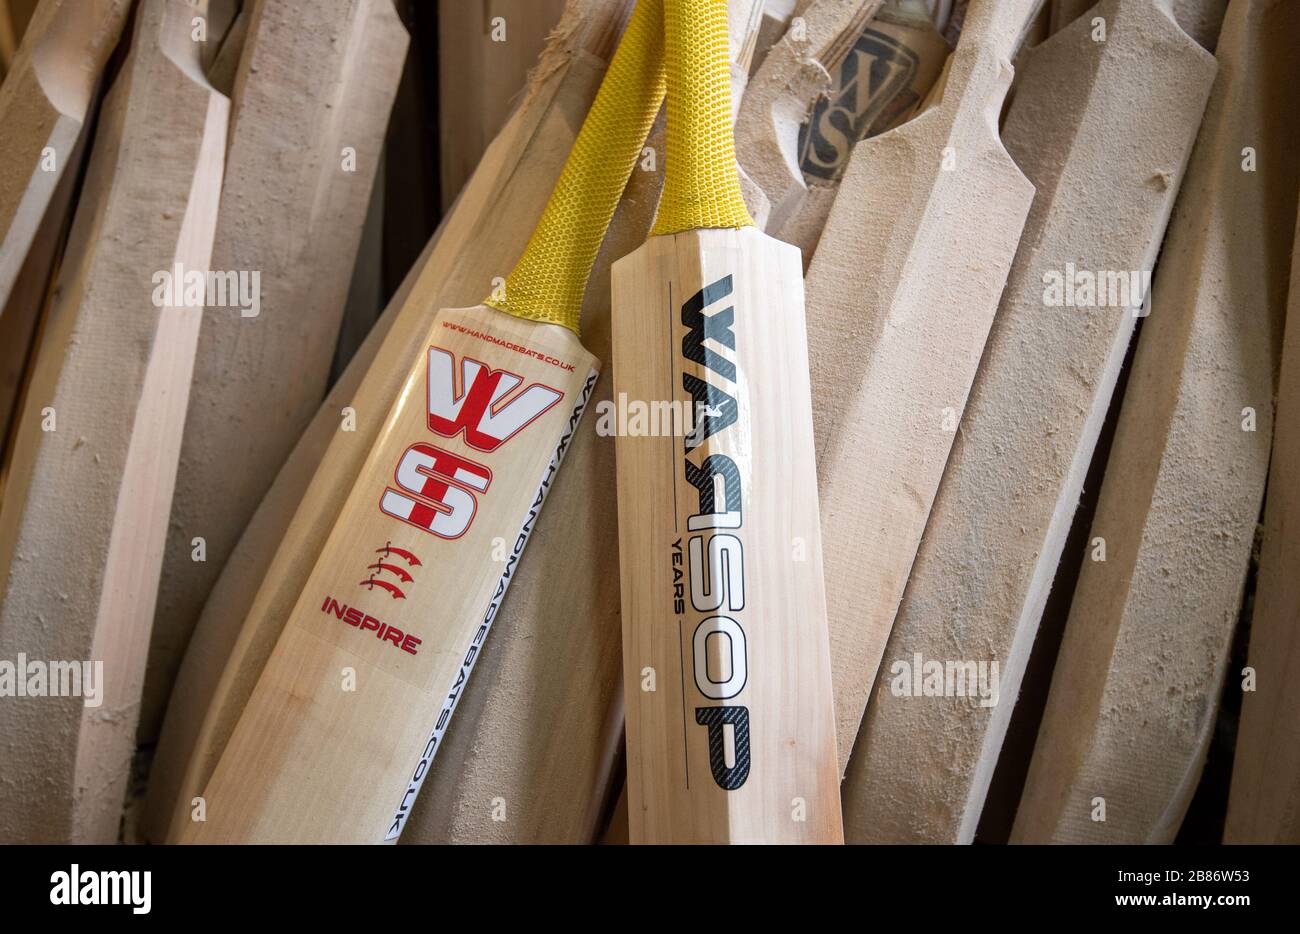 Handmade cricket bats at a workshop at Warsop Stebbing in East Hanningfield, Essex. With the start of the season just weeks away, the ECB, the governing body of cricket have recommend that all forms of recreational cricket are for now suspended. Stock Photo